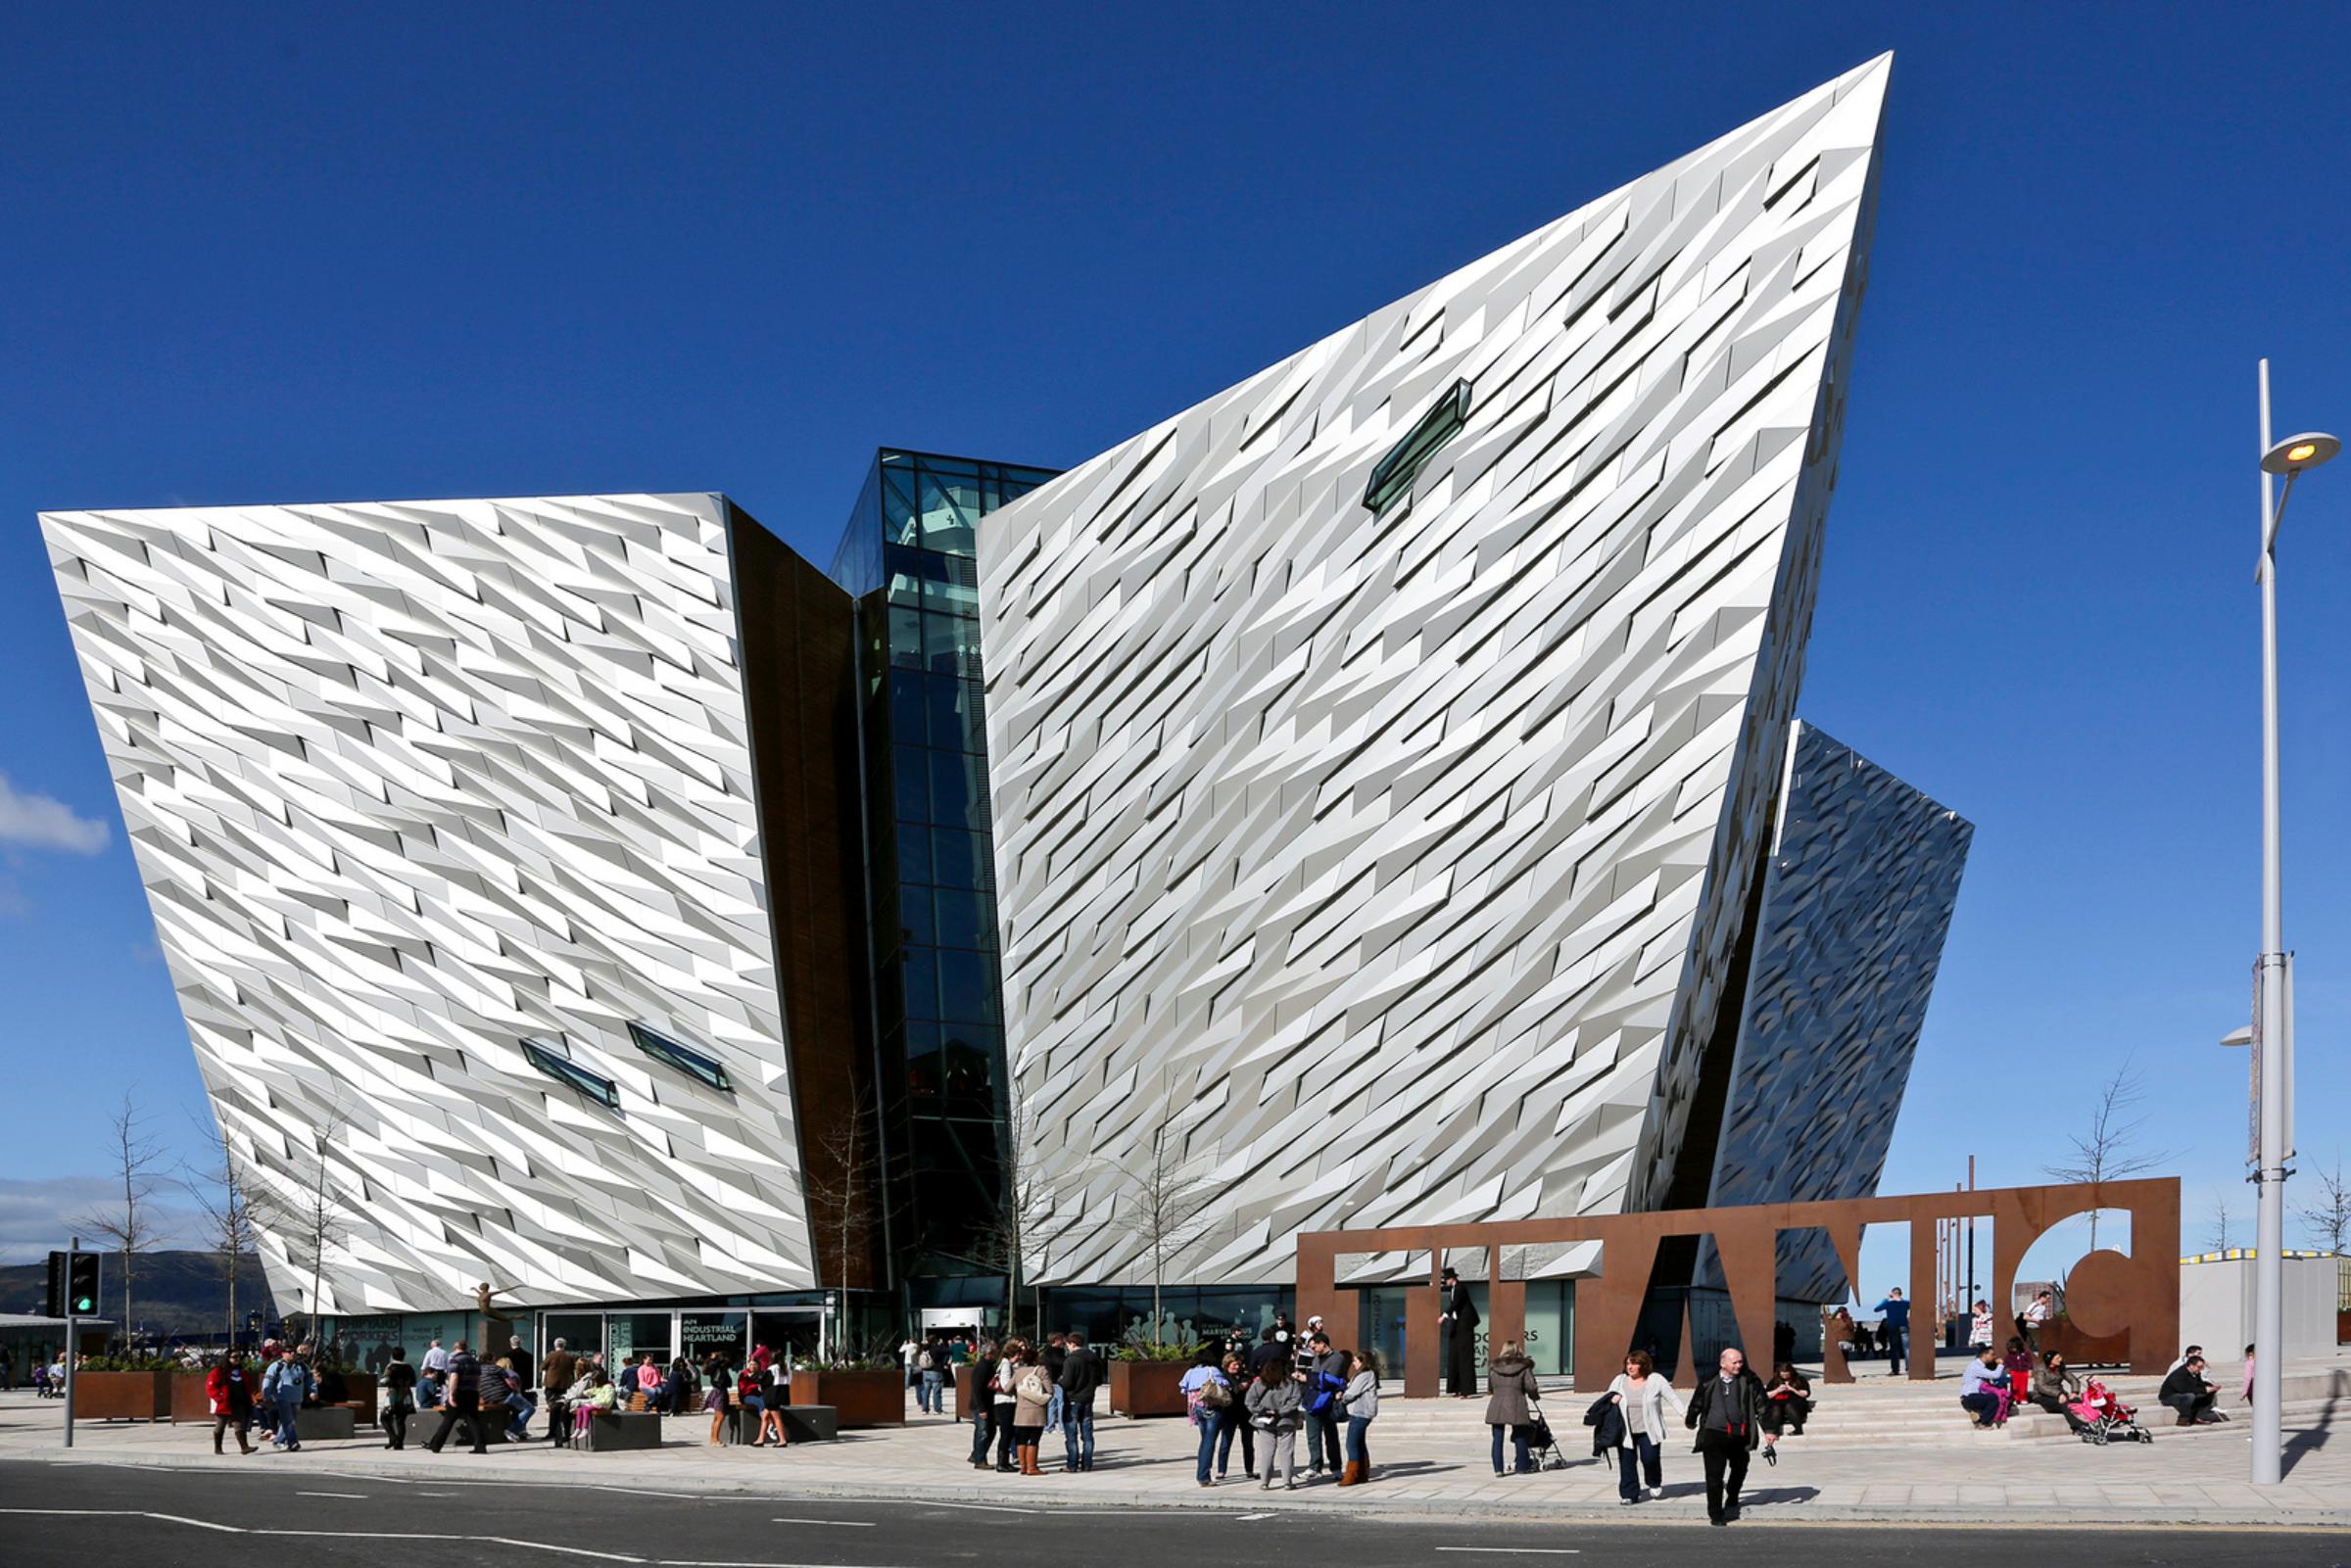 Titanic Belfast Pass: Entry to the Titanic Galleries + SS Nomadic